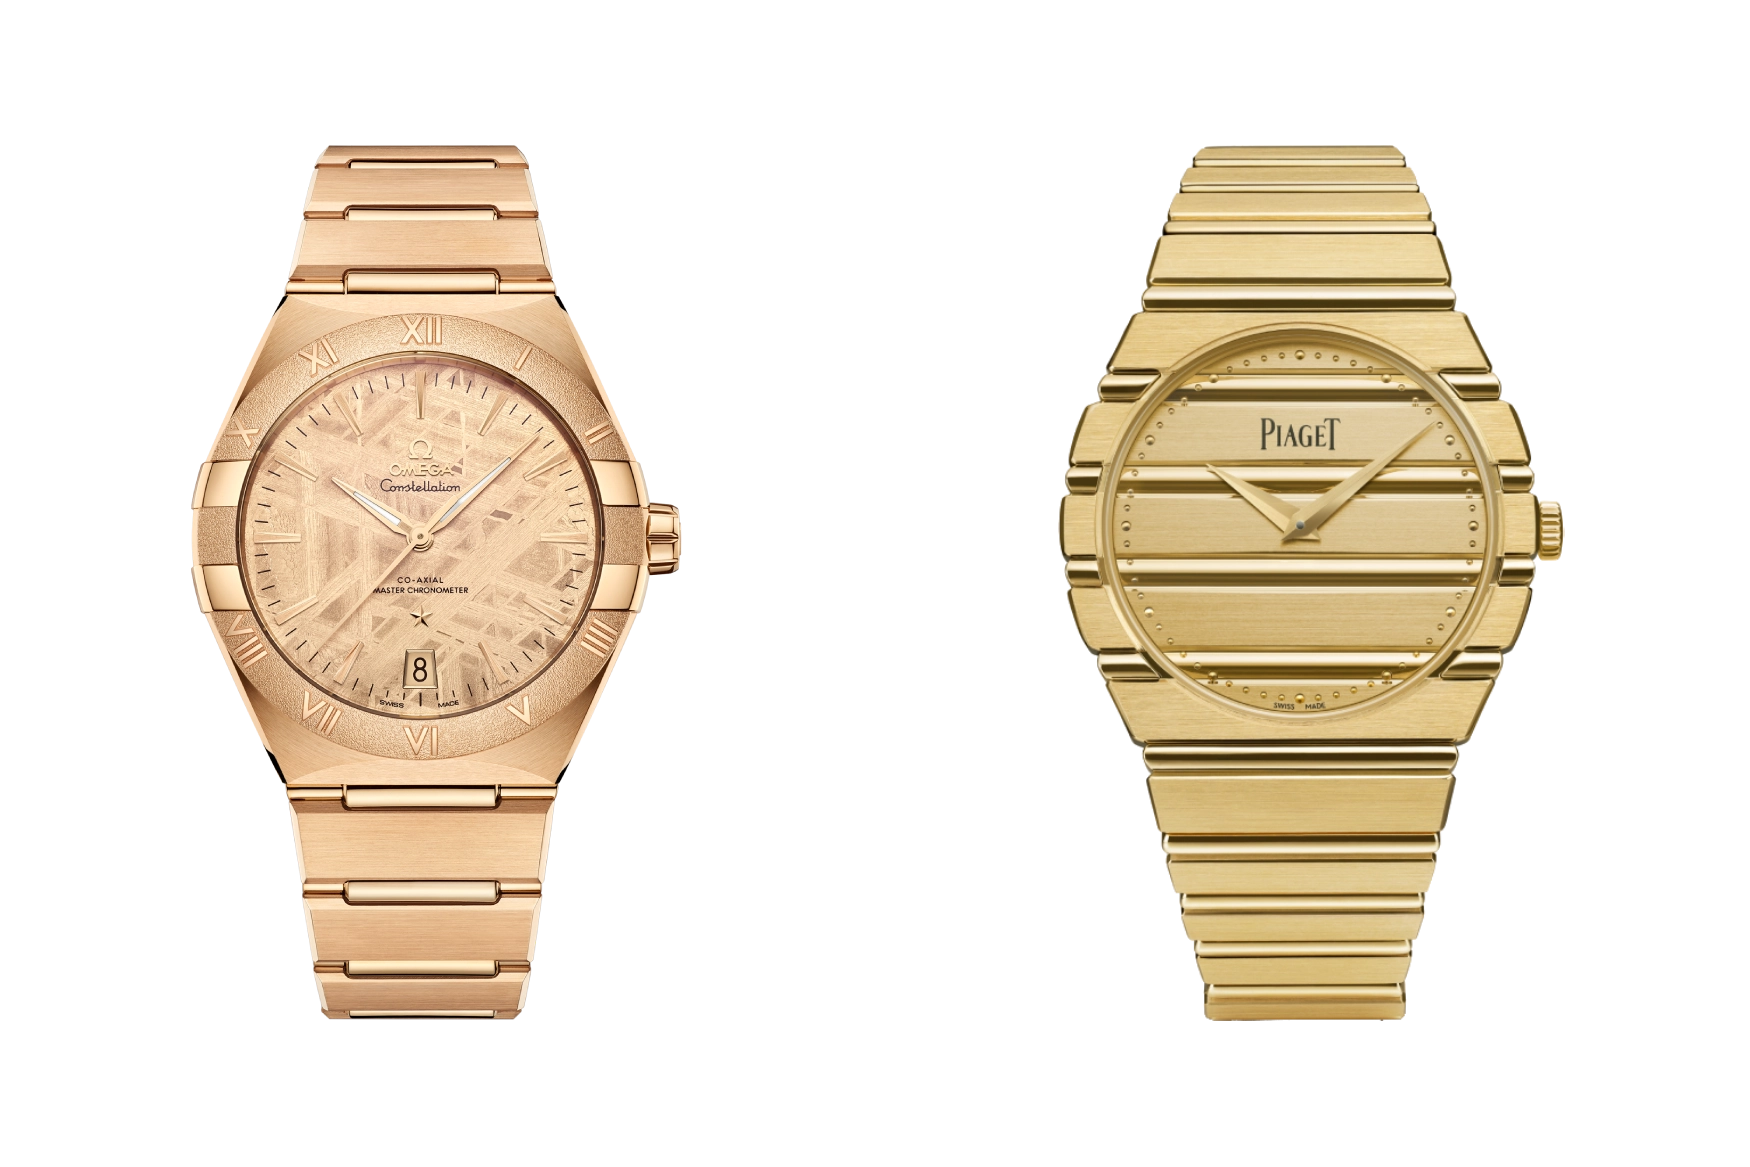 Omega Constellation versus Piaget Polo 79 side by side